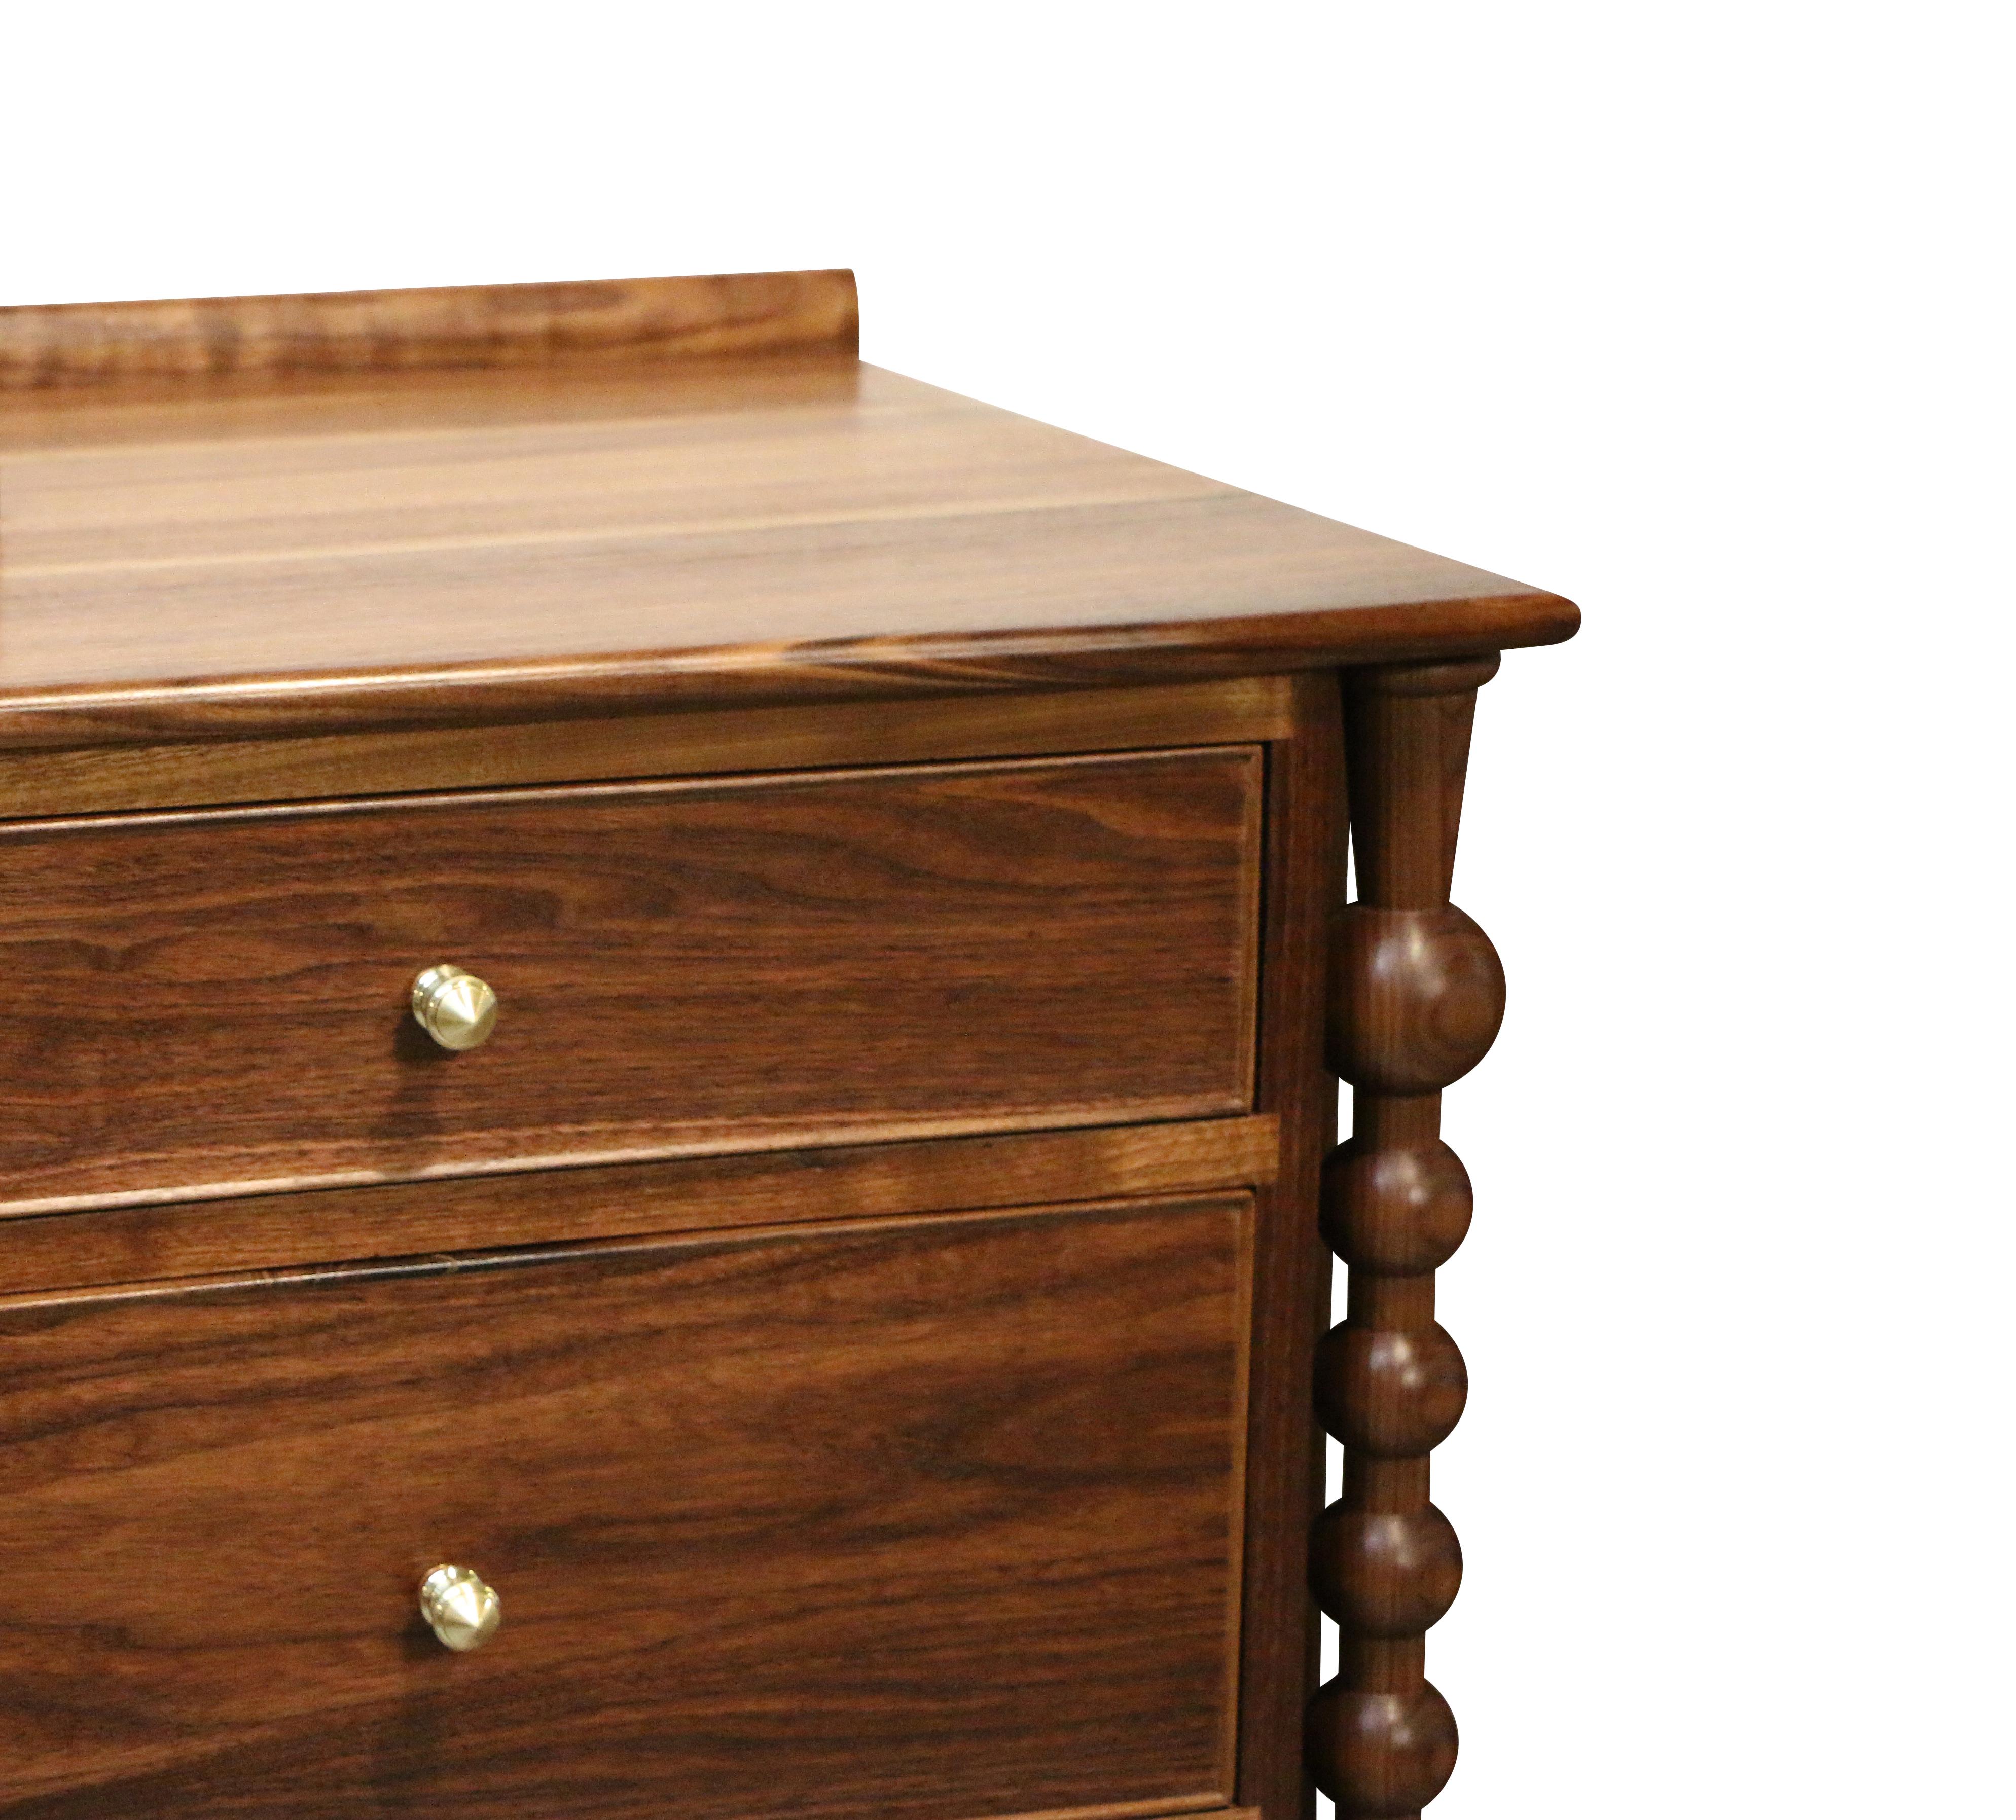 Designed and created by one of the most sought after custom fabricators in the country. J. Pickens’ works are eye-catching statements that are grounded in traditional techniques ,but live in a world all their own. This dresser incorporates a blend